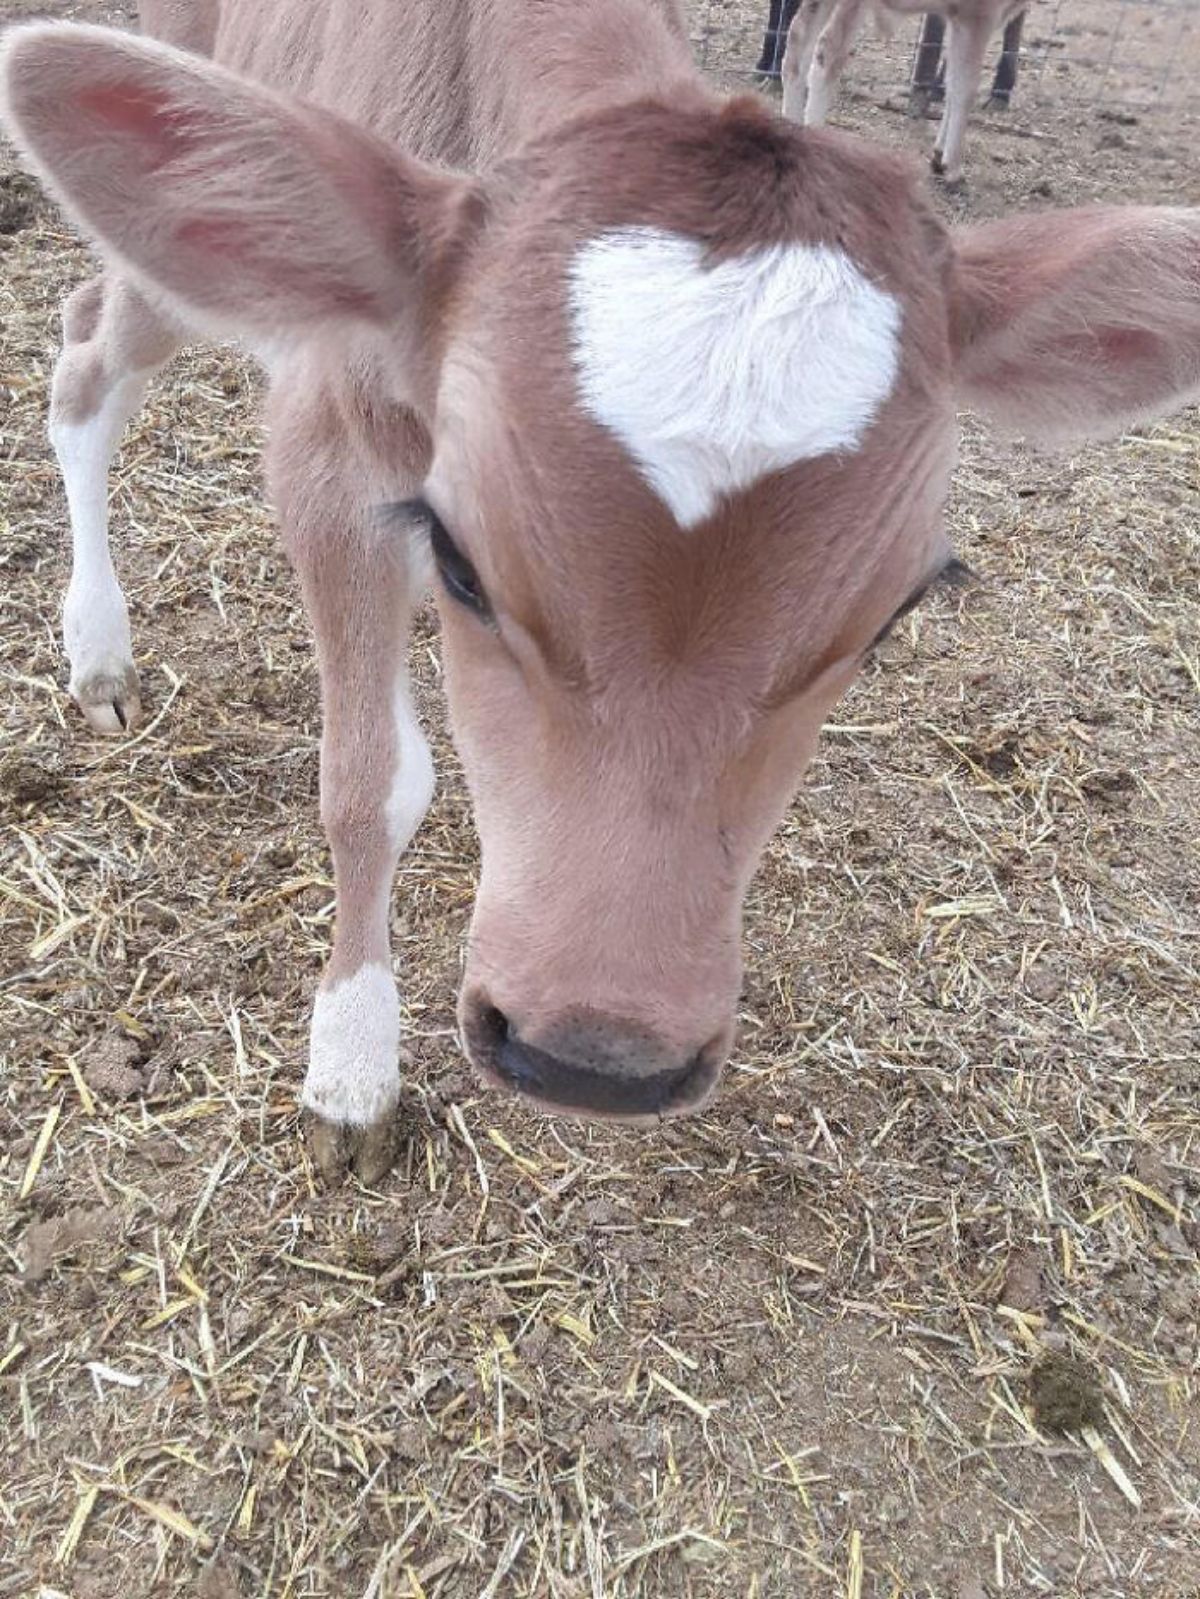 brown and white calf with a white heart mark on the head